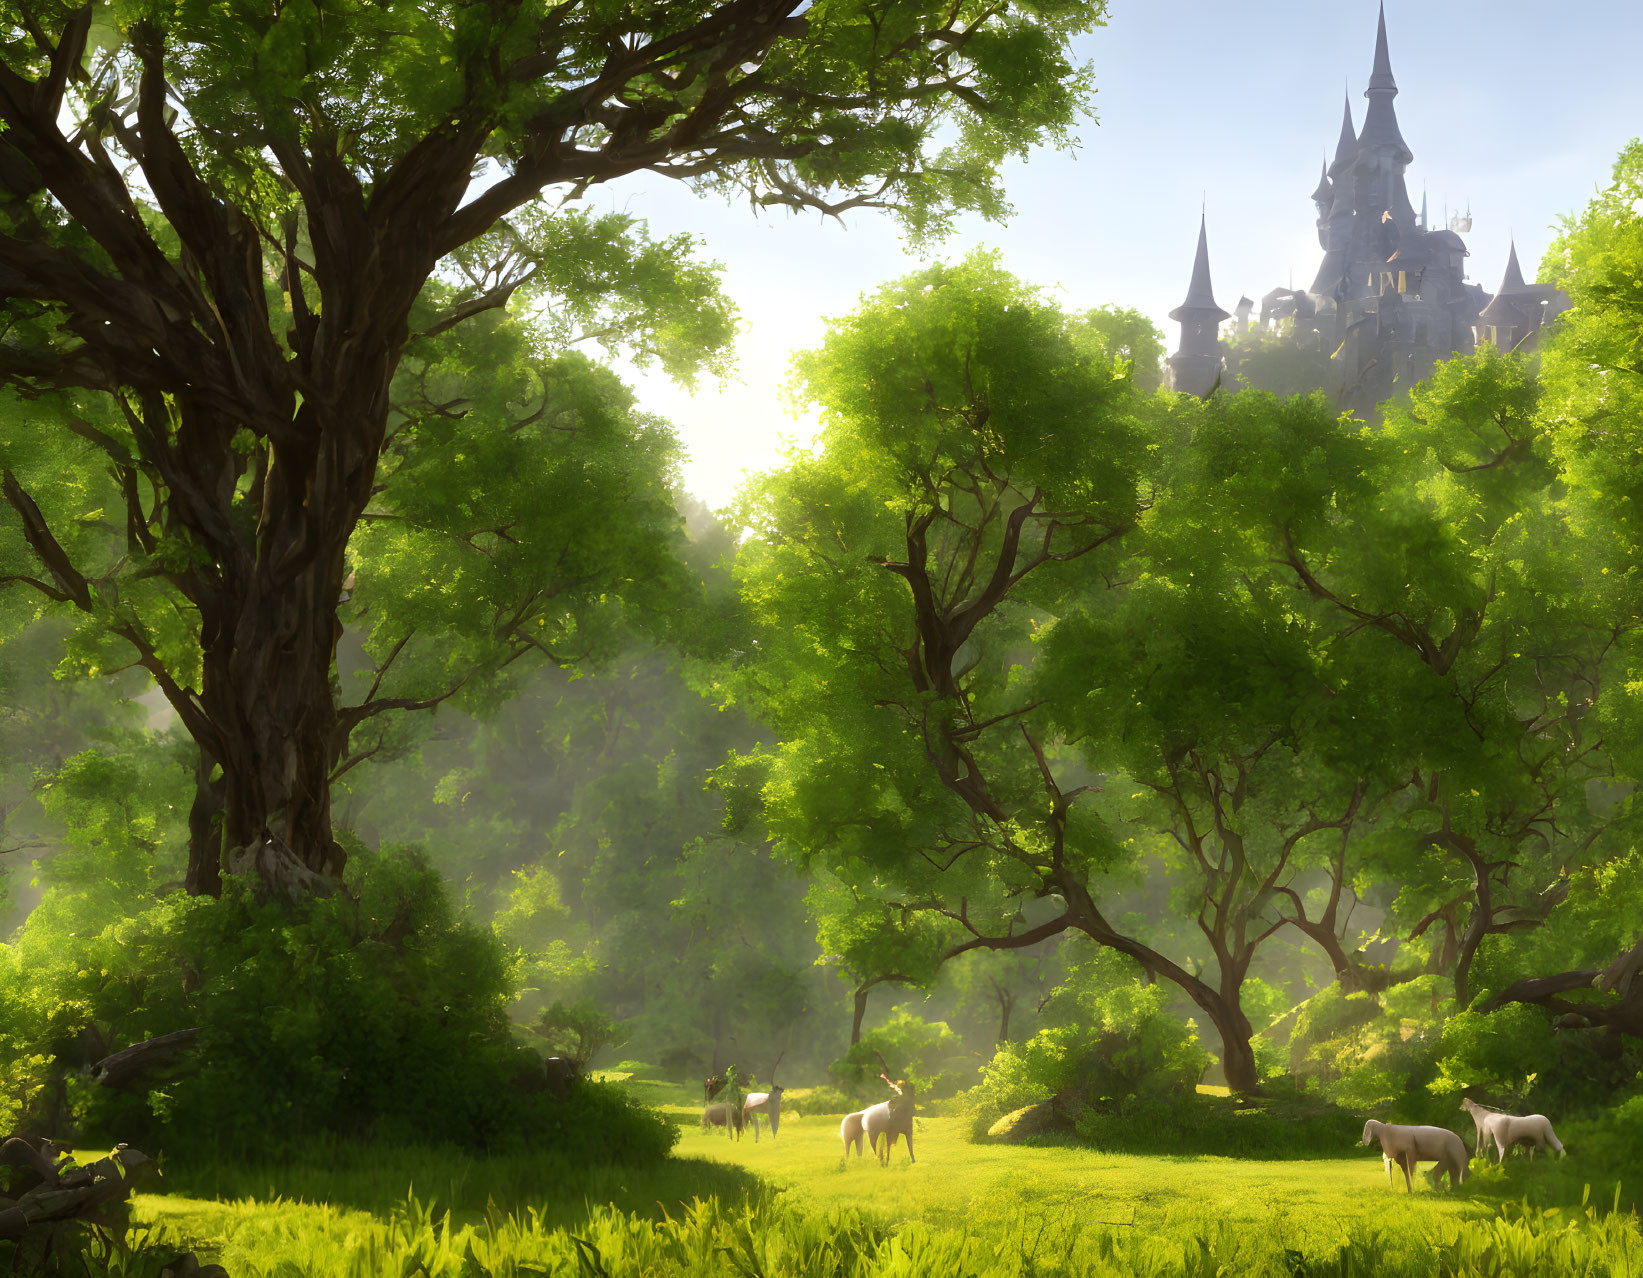 Tranquil landscape with green trees, deer, meadow, and castle in misty ambiance